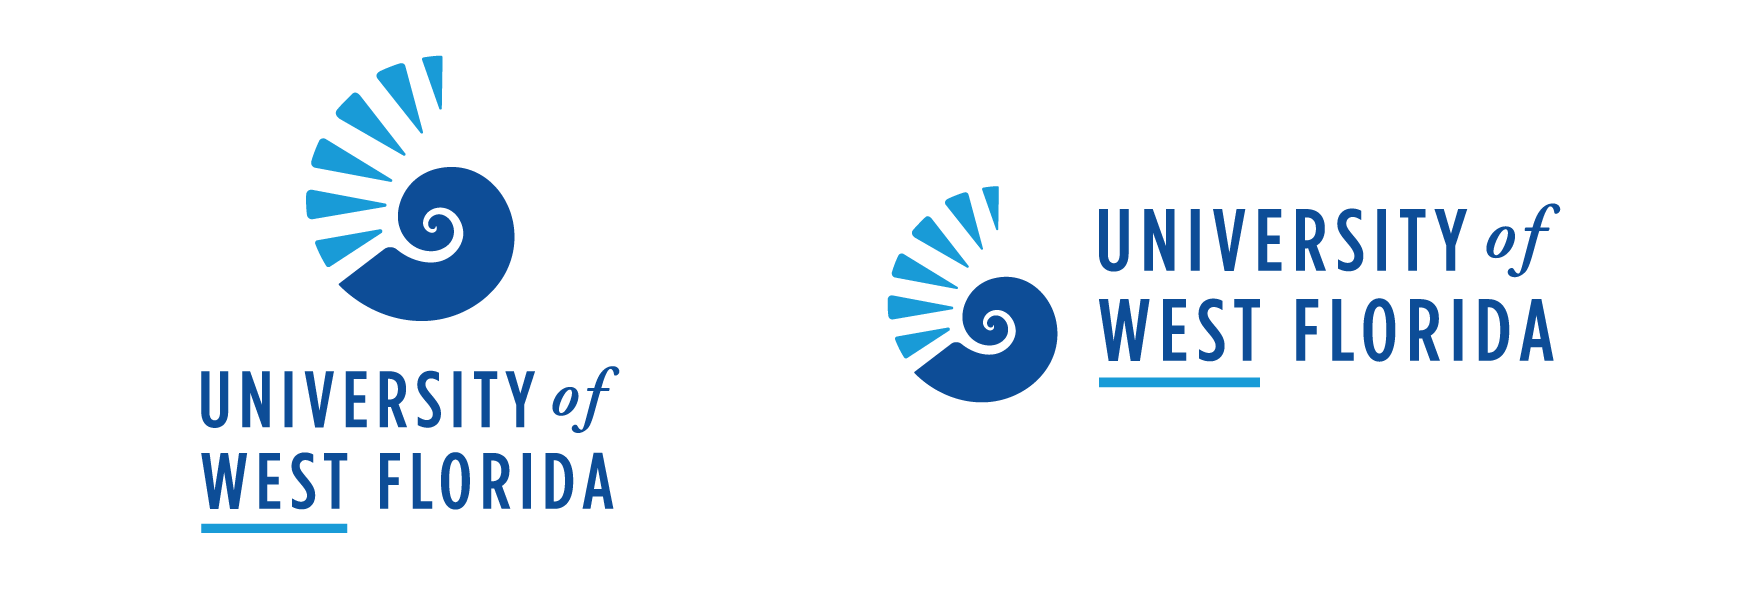 Primary institutional logos for the University of West Florida